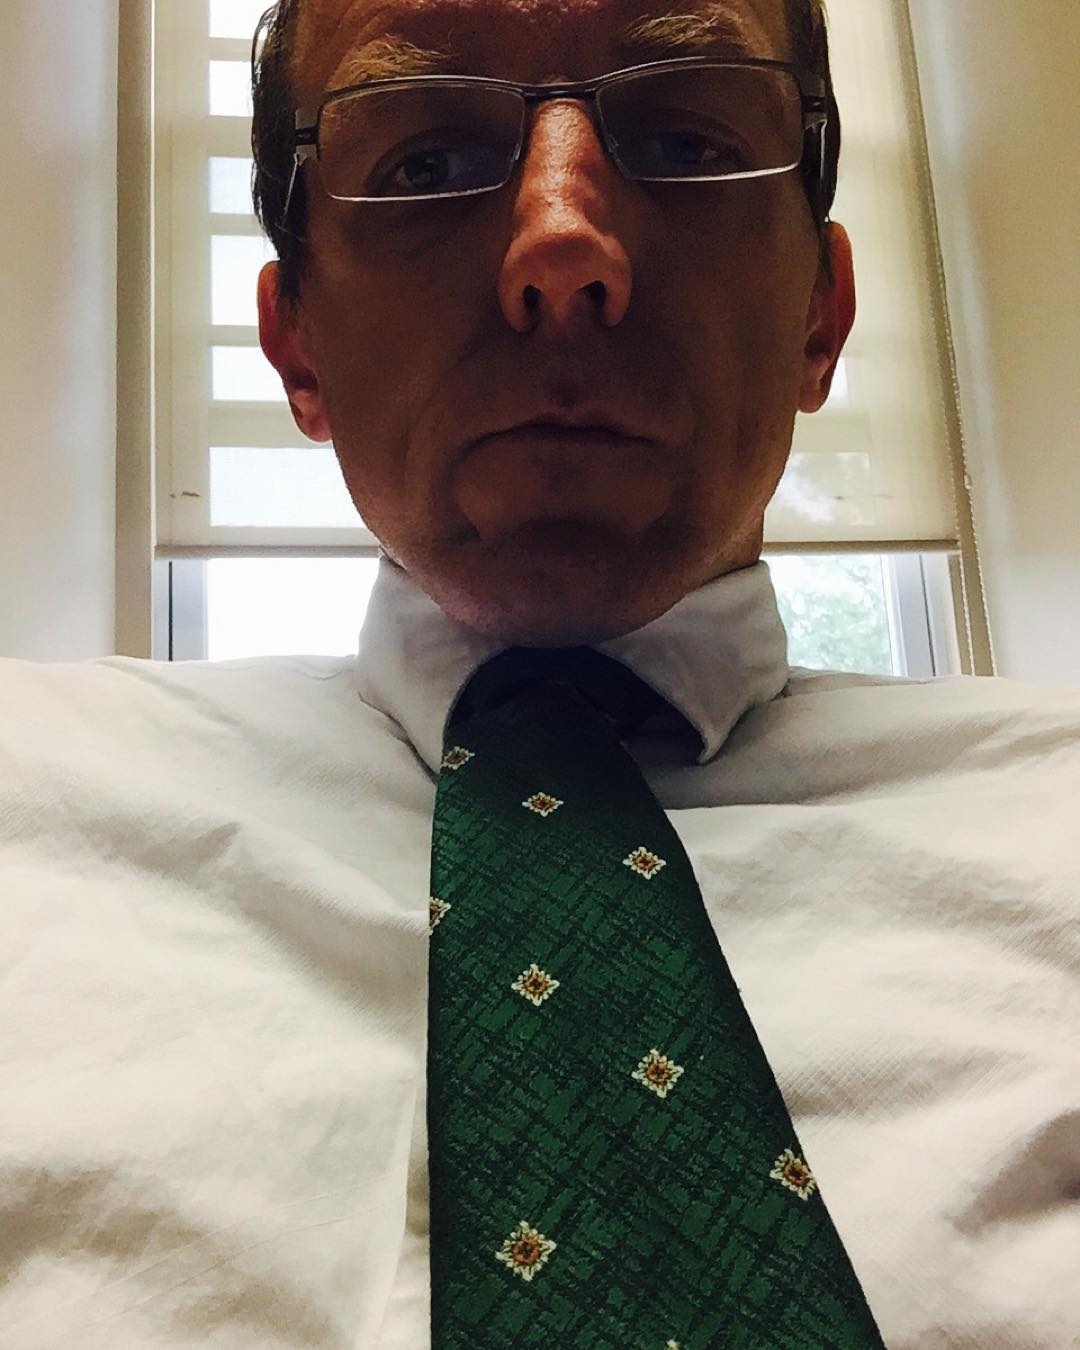 Learning analytics meeting. Wearing Jerry’s green and gold for #tiedayfriday #ftw